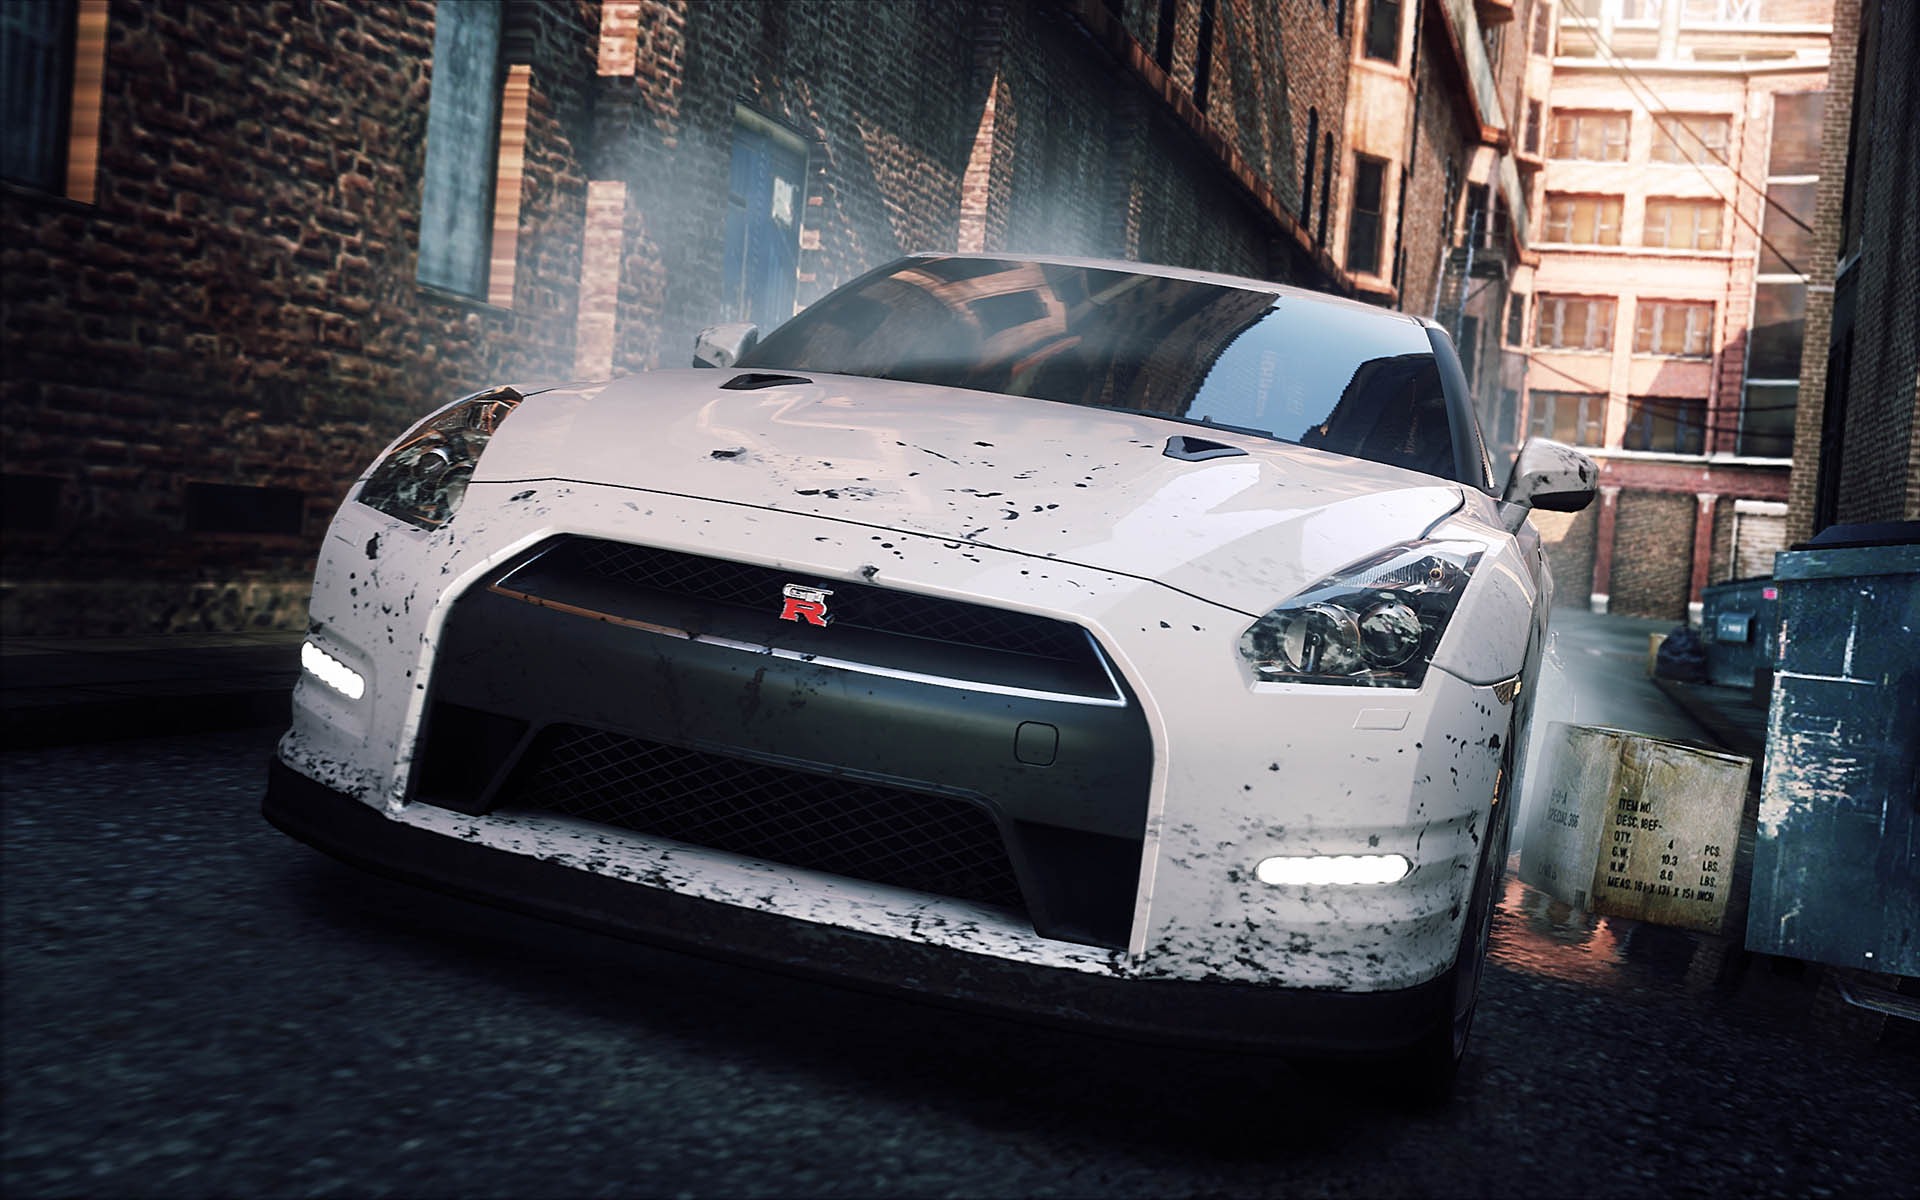 Need for Speed: Most Wanted 极品飞车17：最高通缉 高清壁纸9 - 1920x1200